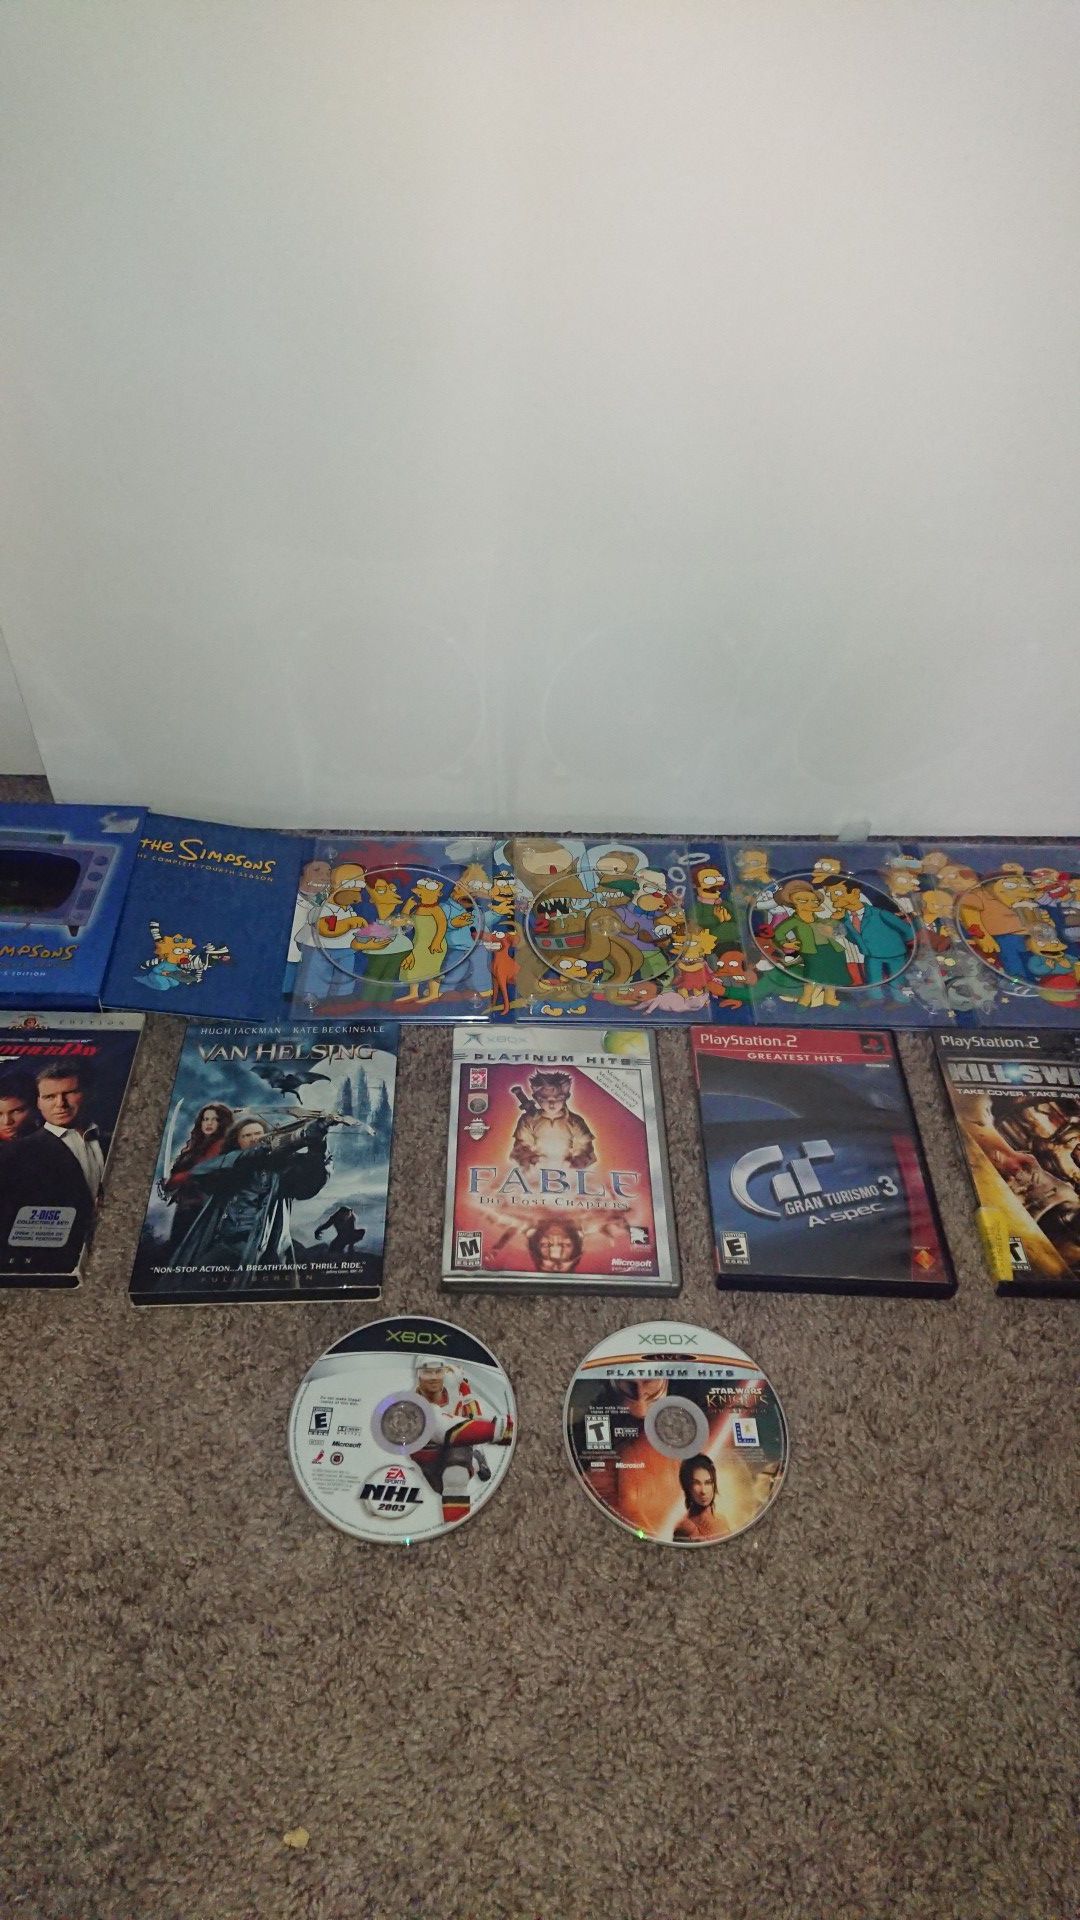 Video games and DVDs